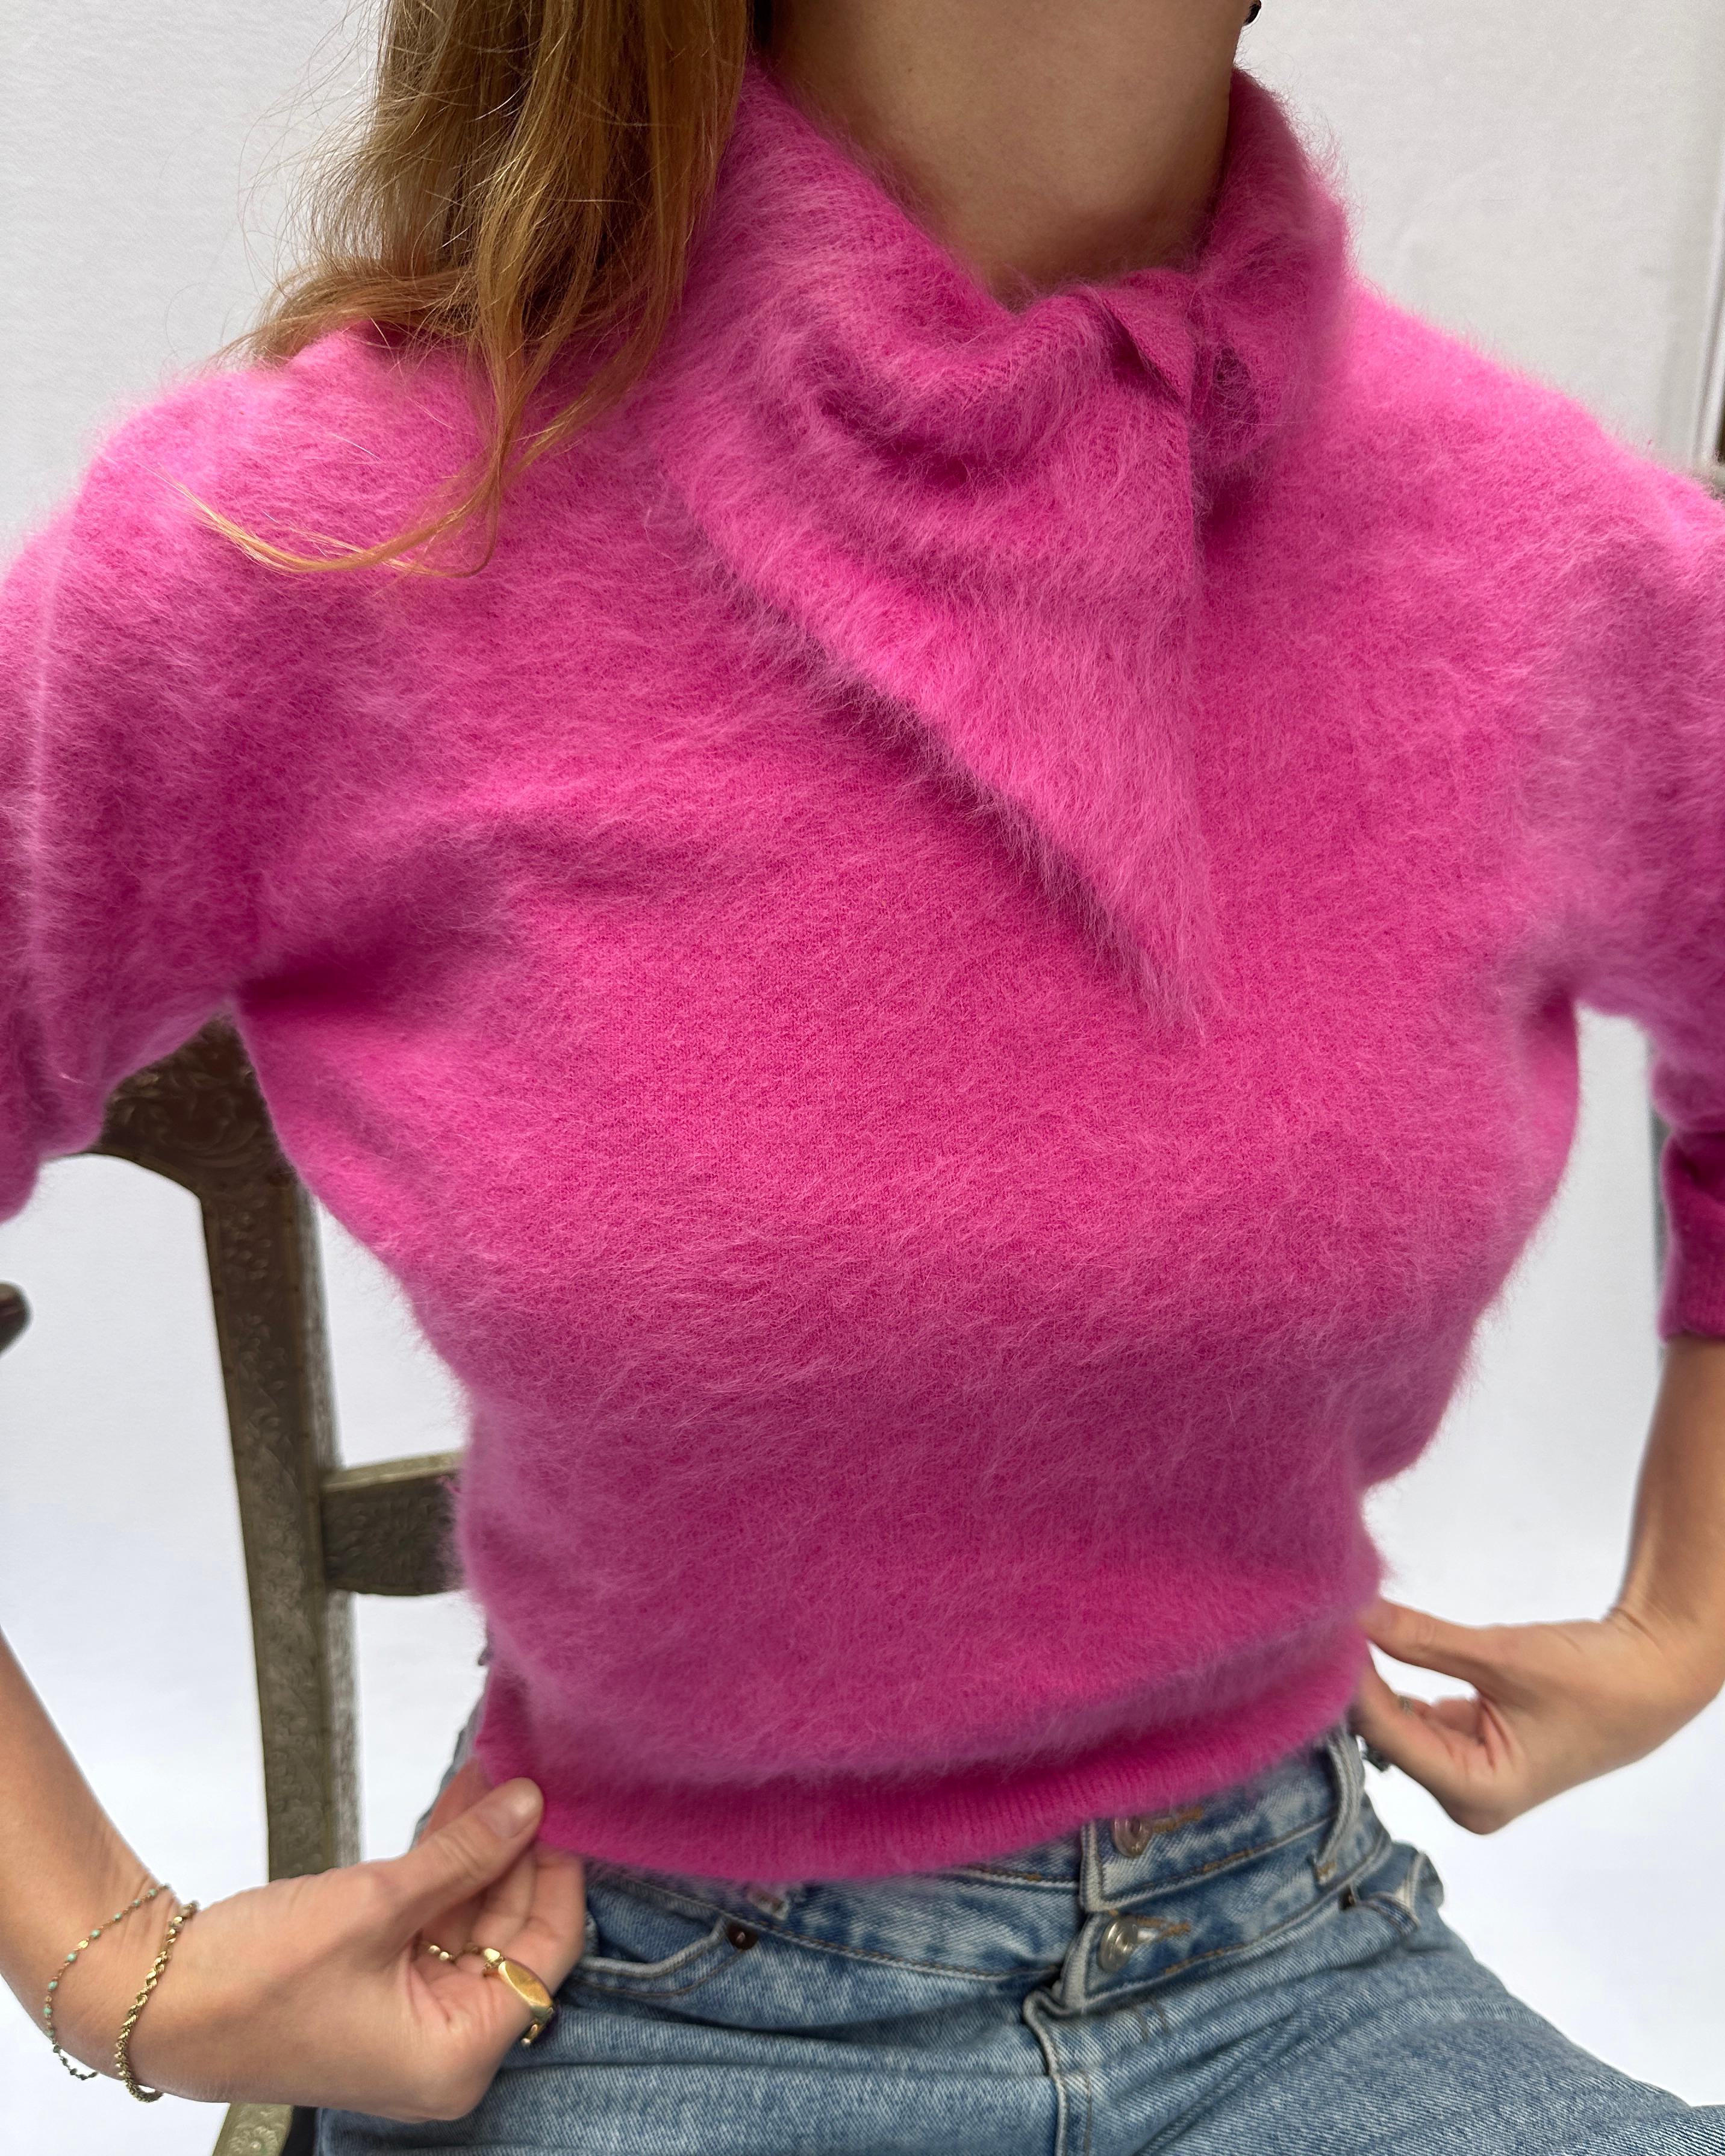 This vintage 1950s Barbie pink cropped angora sweater is pure joy— the color is just perfection. It is made of the softest French angora rabbit hair— it's extremely soft and not the least bit itchy. I absolutely obsessed with the cut and shape of